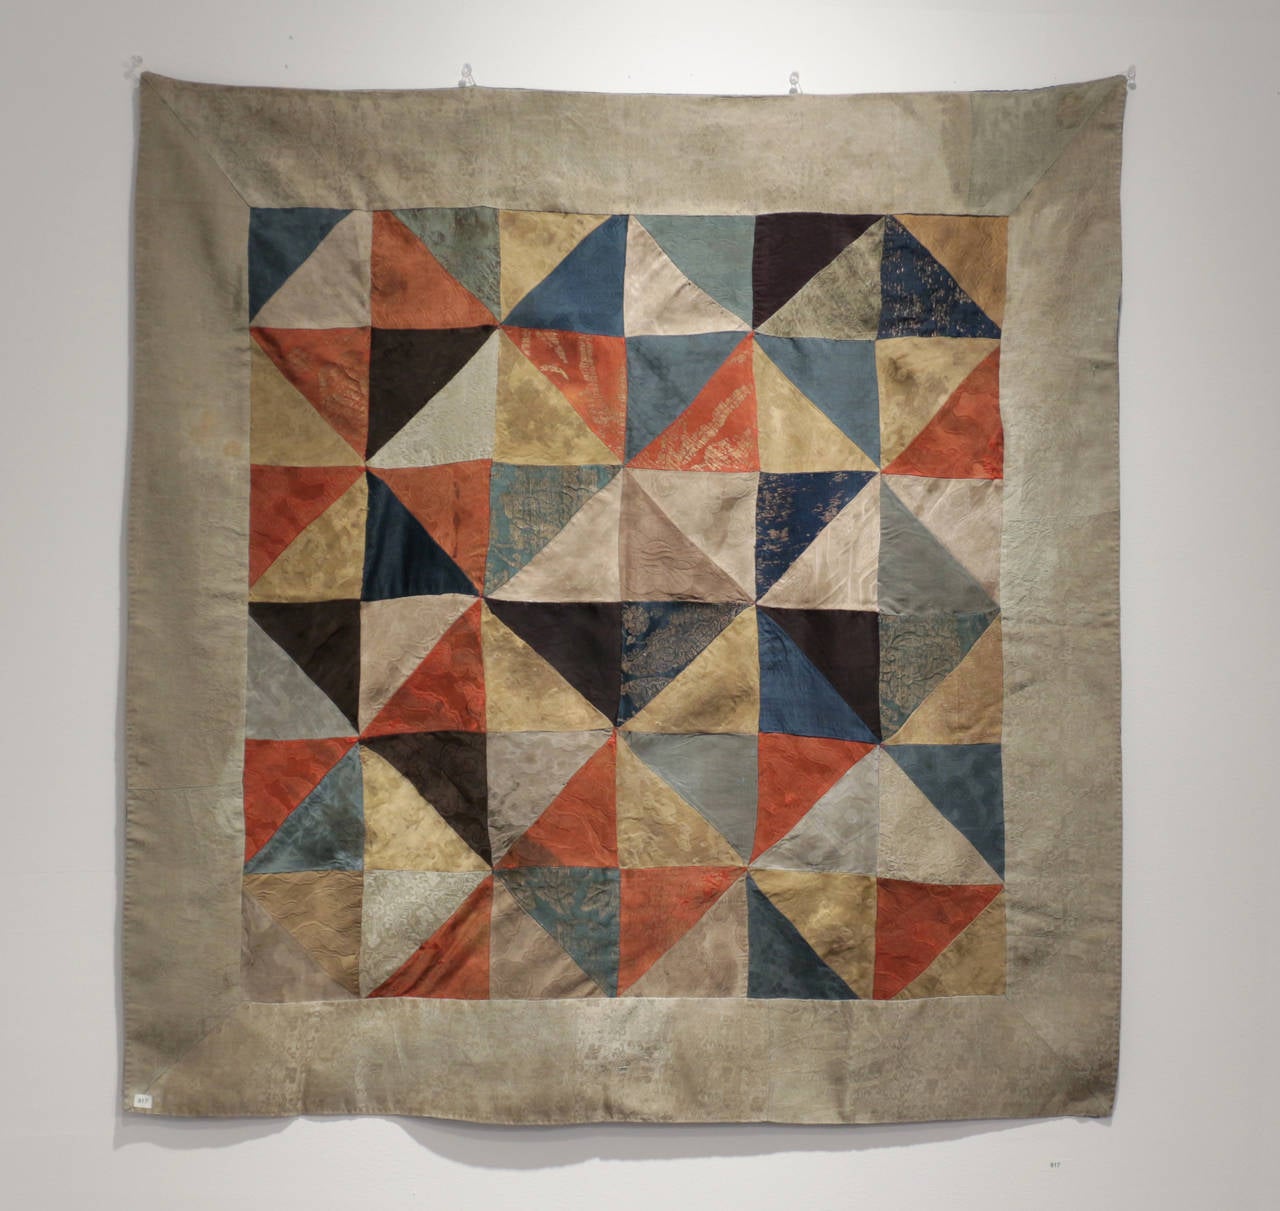 Silk Buddhist offering cloth, 18th century Tibet.
This primordial applique pattern of rainbow colored silks is traditional to Buddhist offering ceremonies since the time of the Buddha himself, 2500 years ago. The pattern not only has an op art like